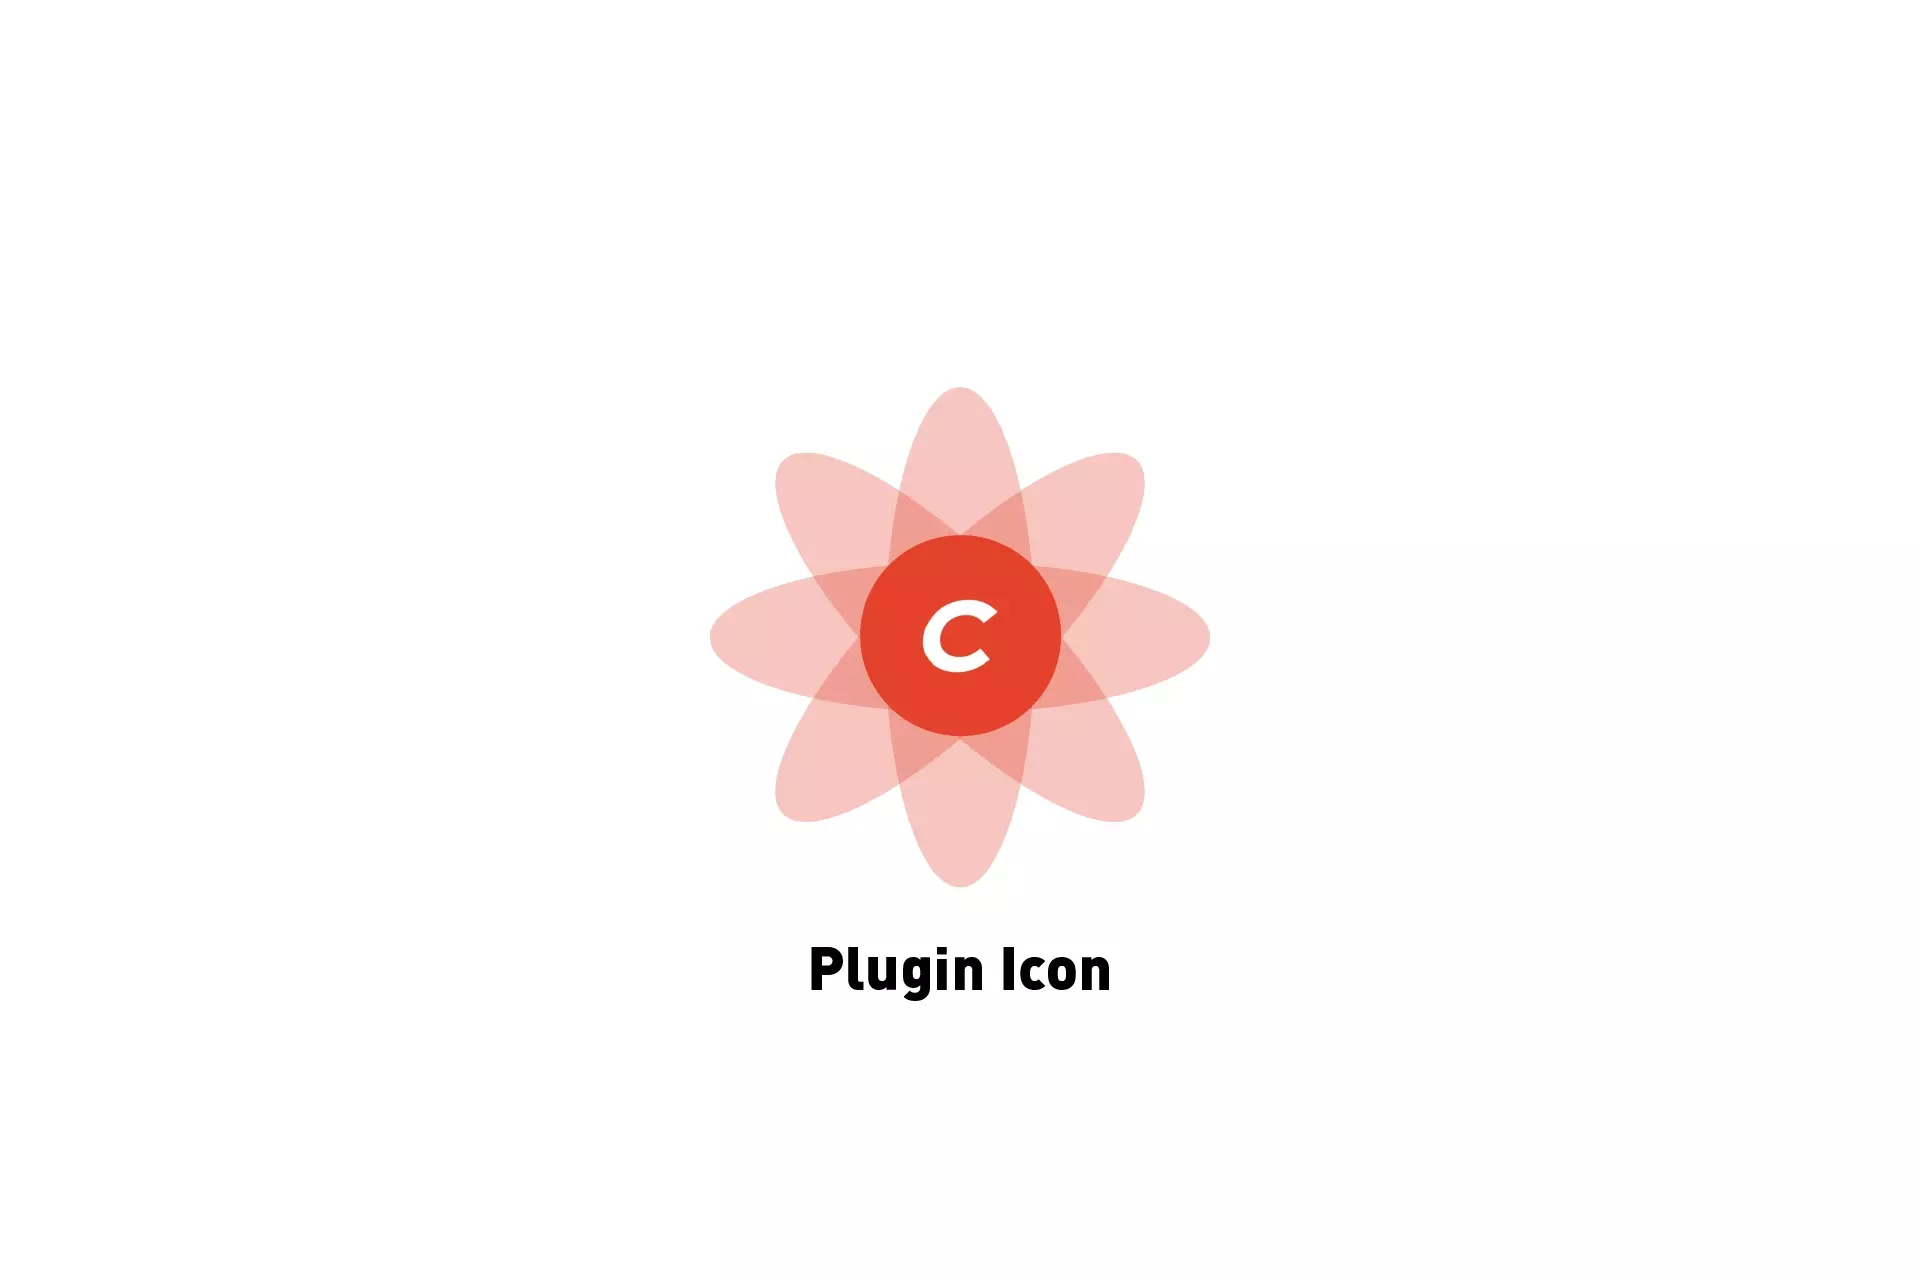 A flower that represents Craft CMS with the text "Plugin Icon" beneath it.